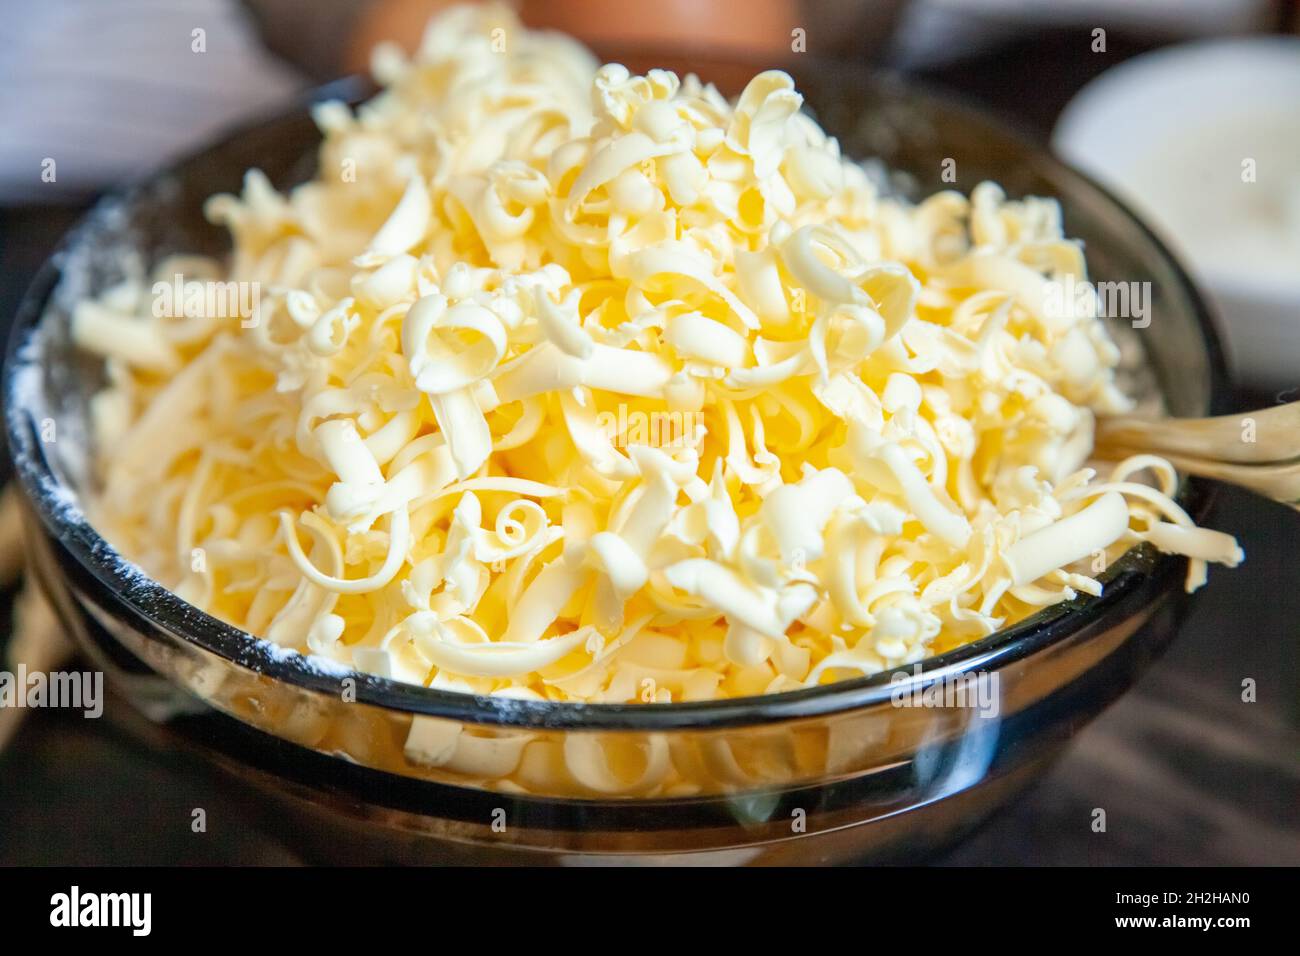 Grated butter for baking on table. Baking ingredients for shortbread pastry: grated butter, flour, eggs, sour cream on a wooden background. Stock Photo